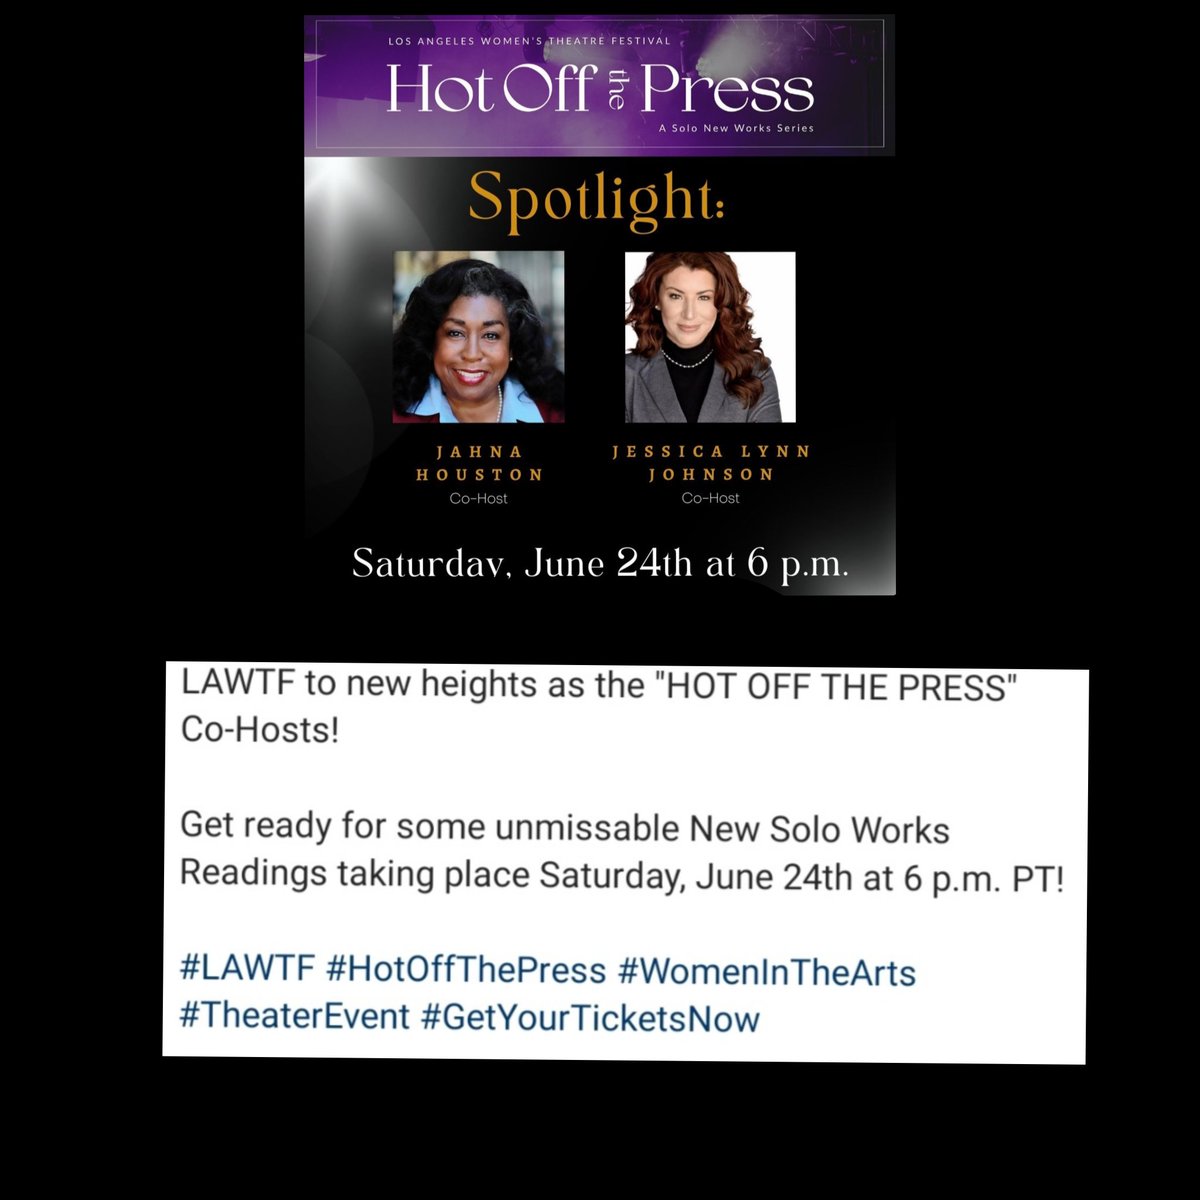 HOT OFF THE PRESS 'SPOTLIGHT'
Website - lawtf.org
#LAWTF #hotoffthepress #womeninthearts #theaterevent #getyourticketsnow